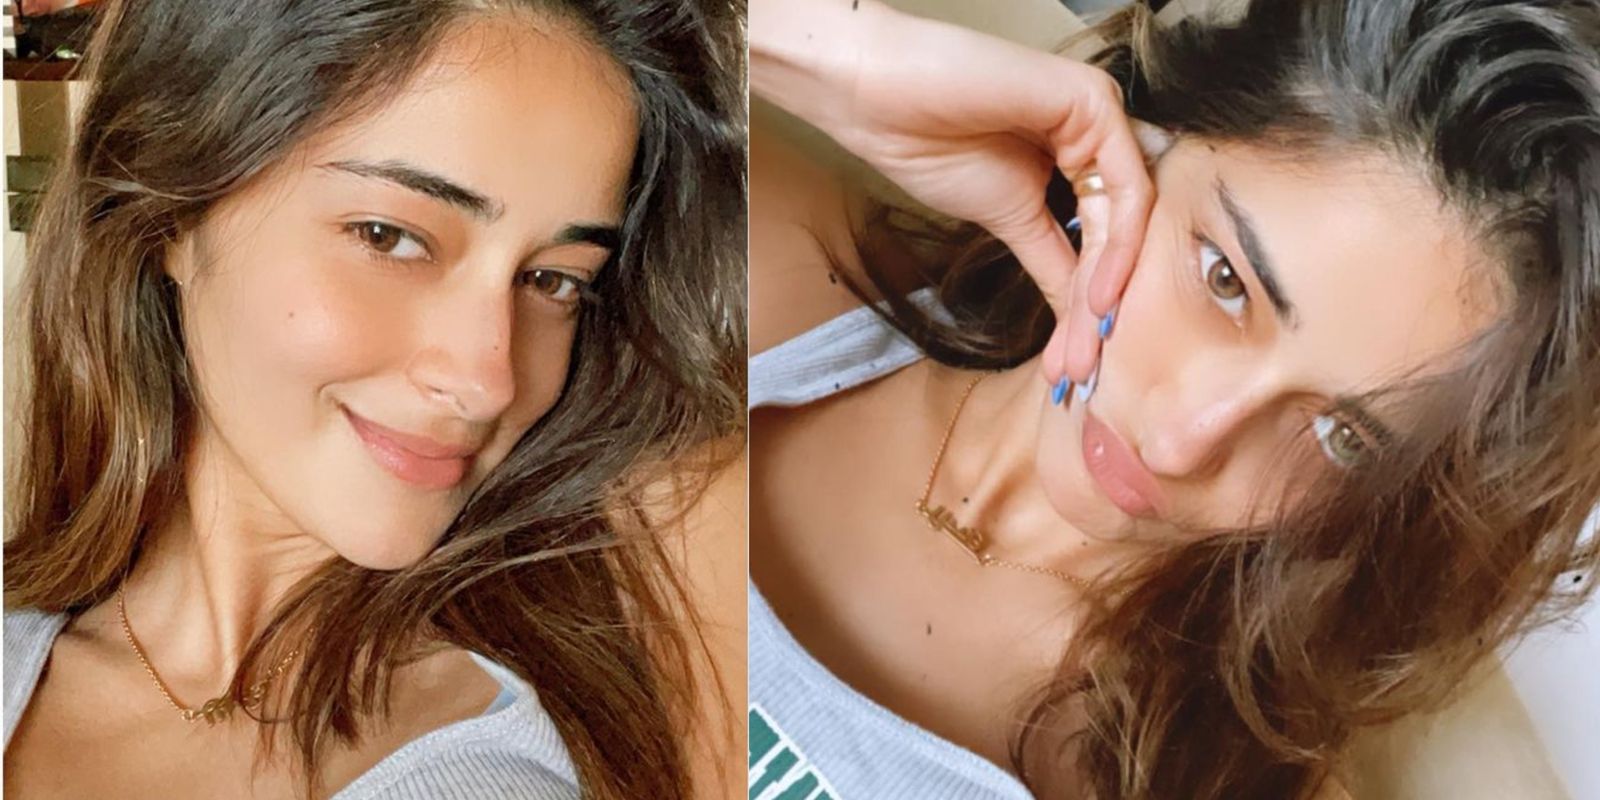 Ananya Panday Shares Gorgeous Selfies Along With An Empowering Message; Check It Out